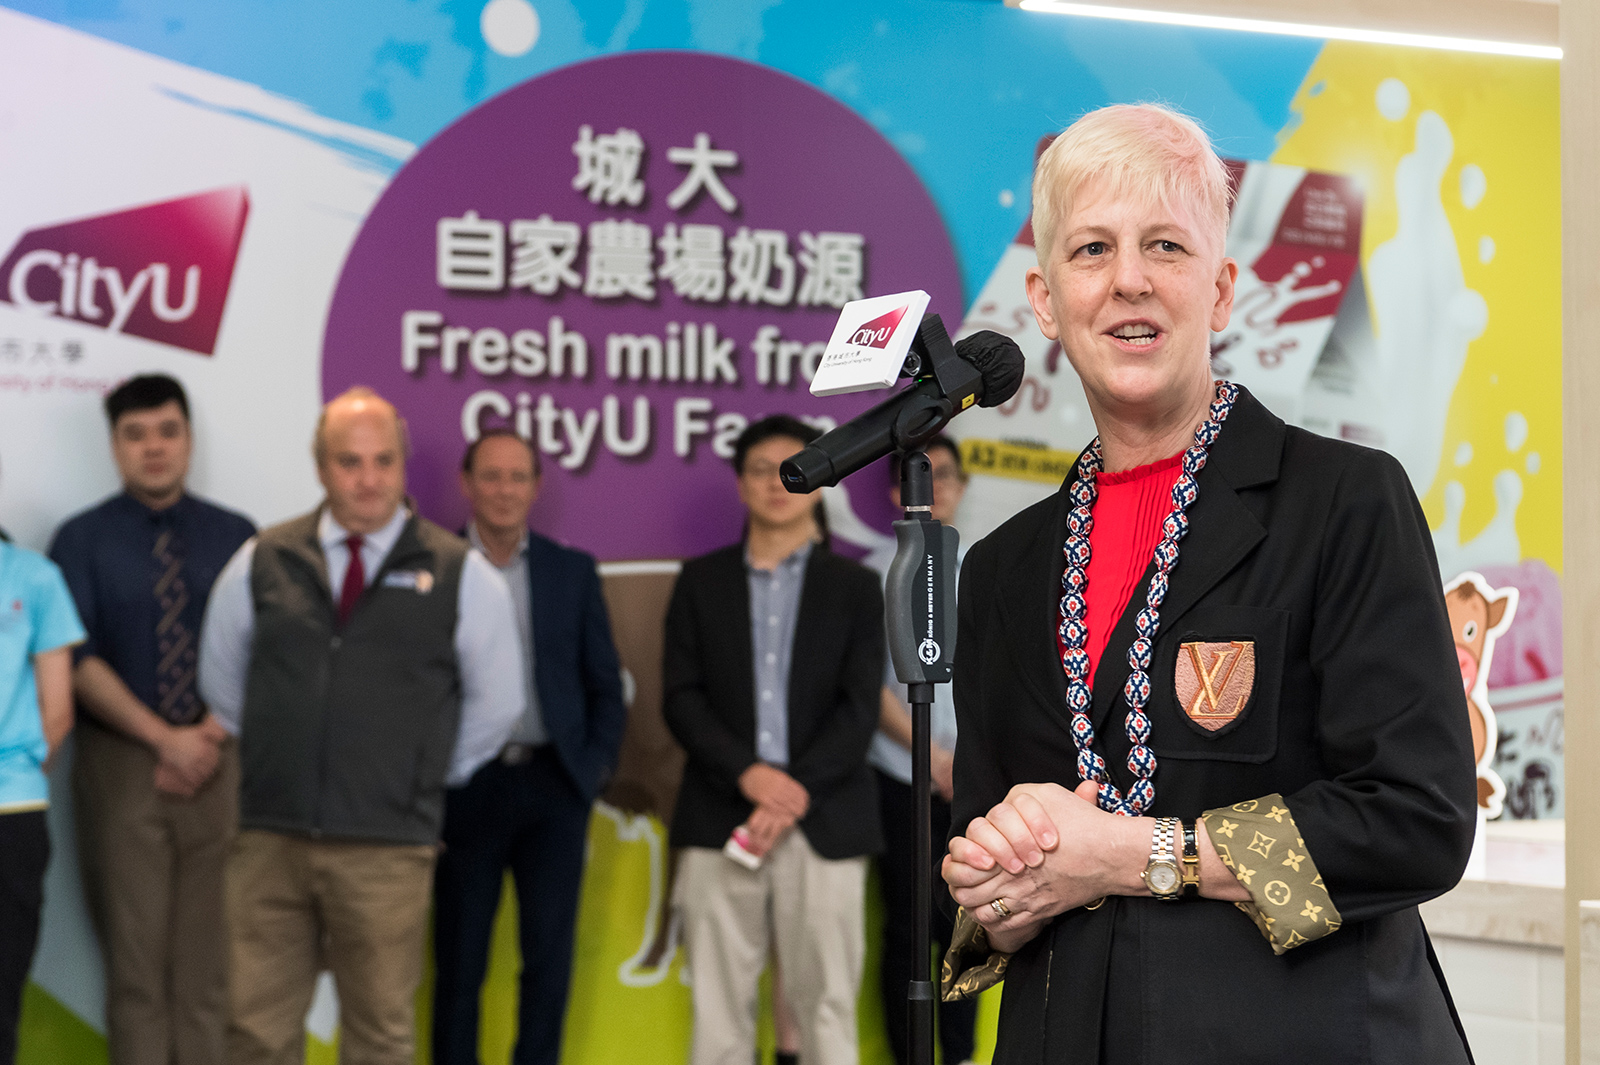 Sustainable milk production is a key focus of teaching at CityU Farm, Professor Barrs stresses.